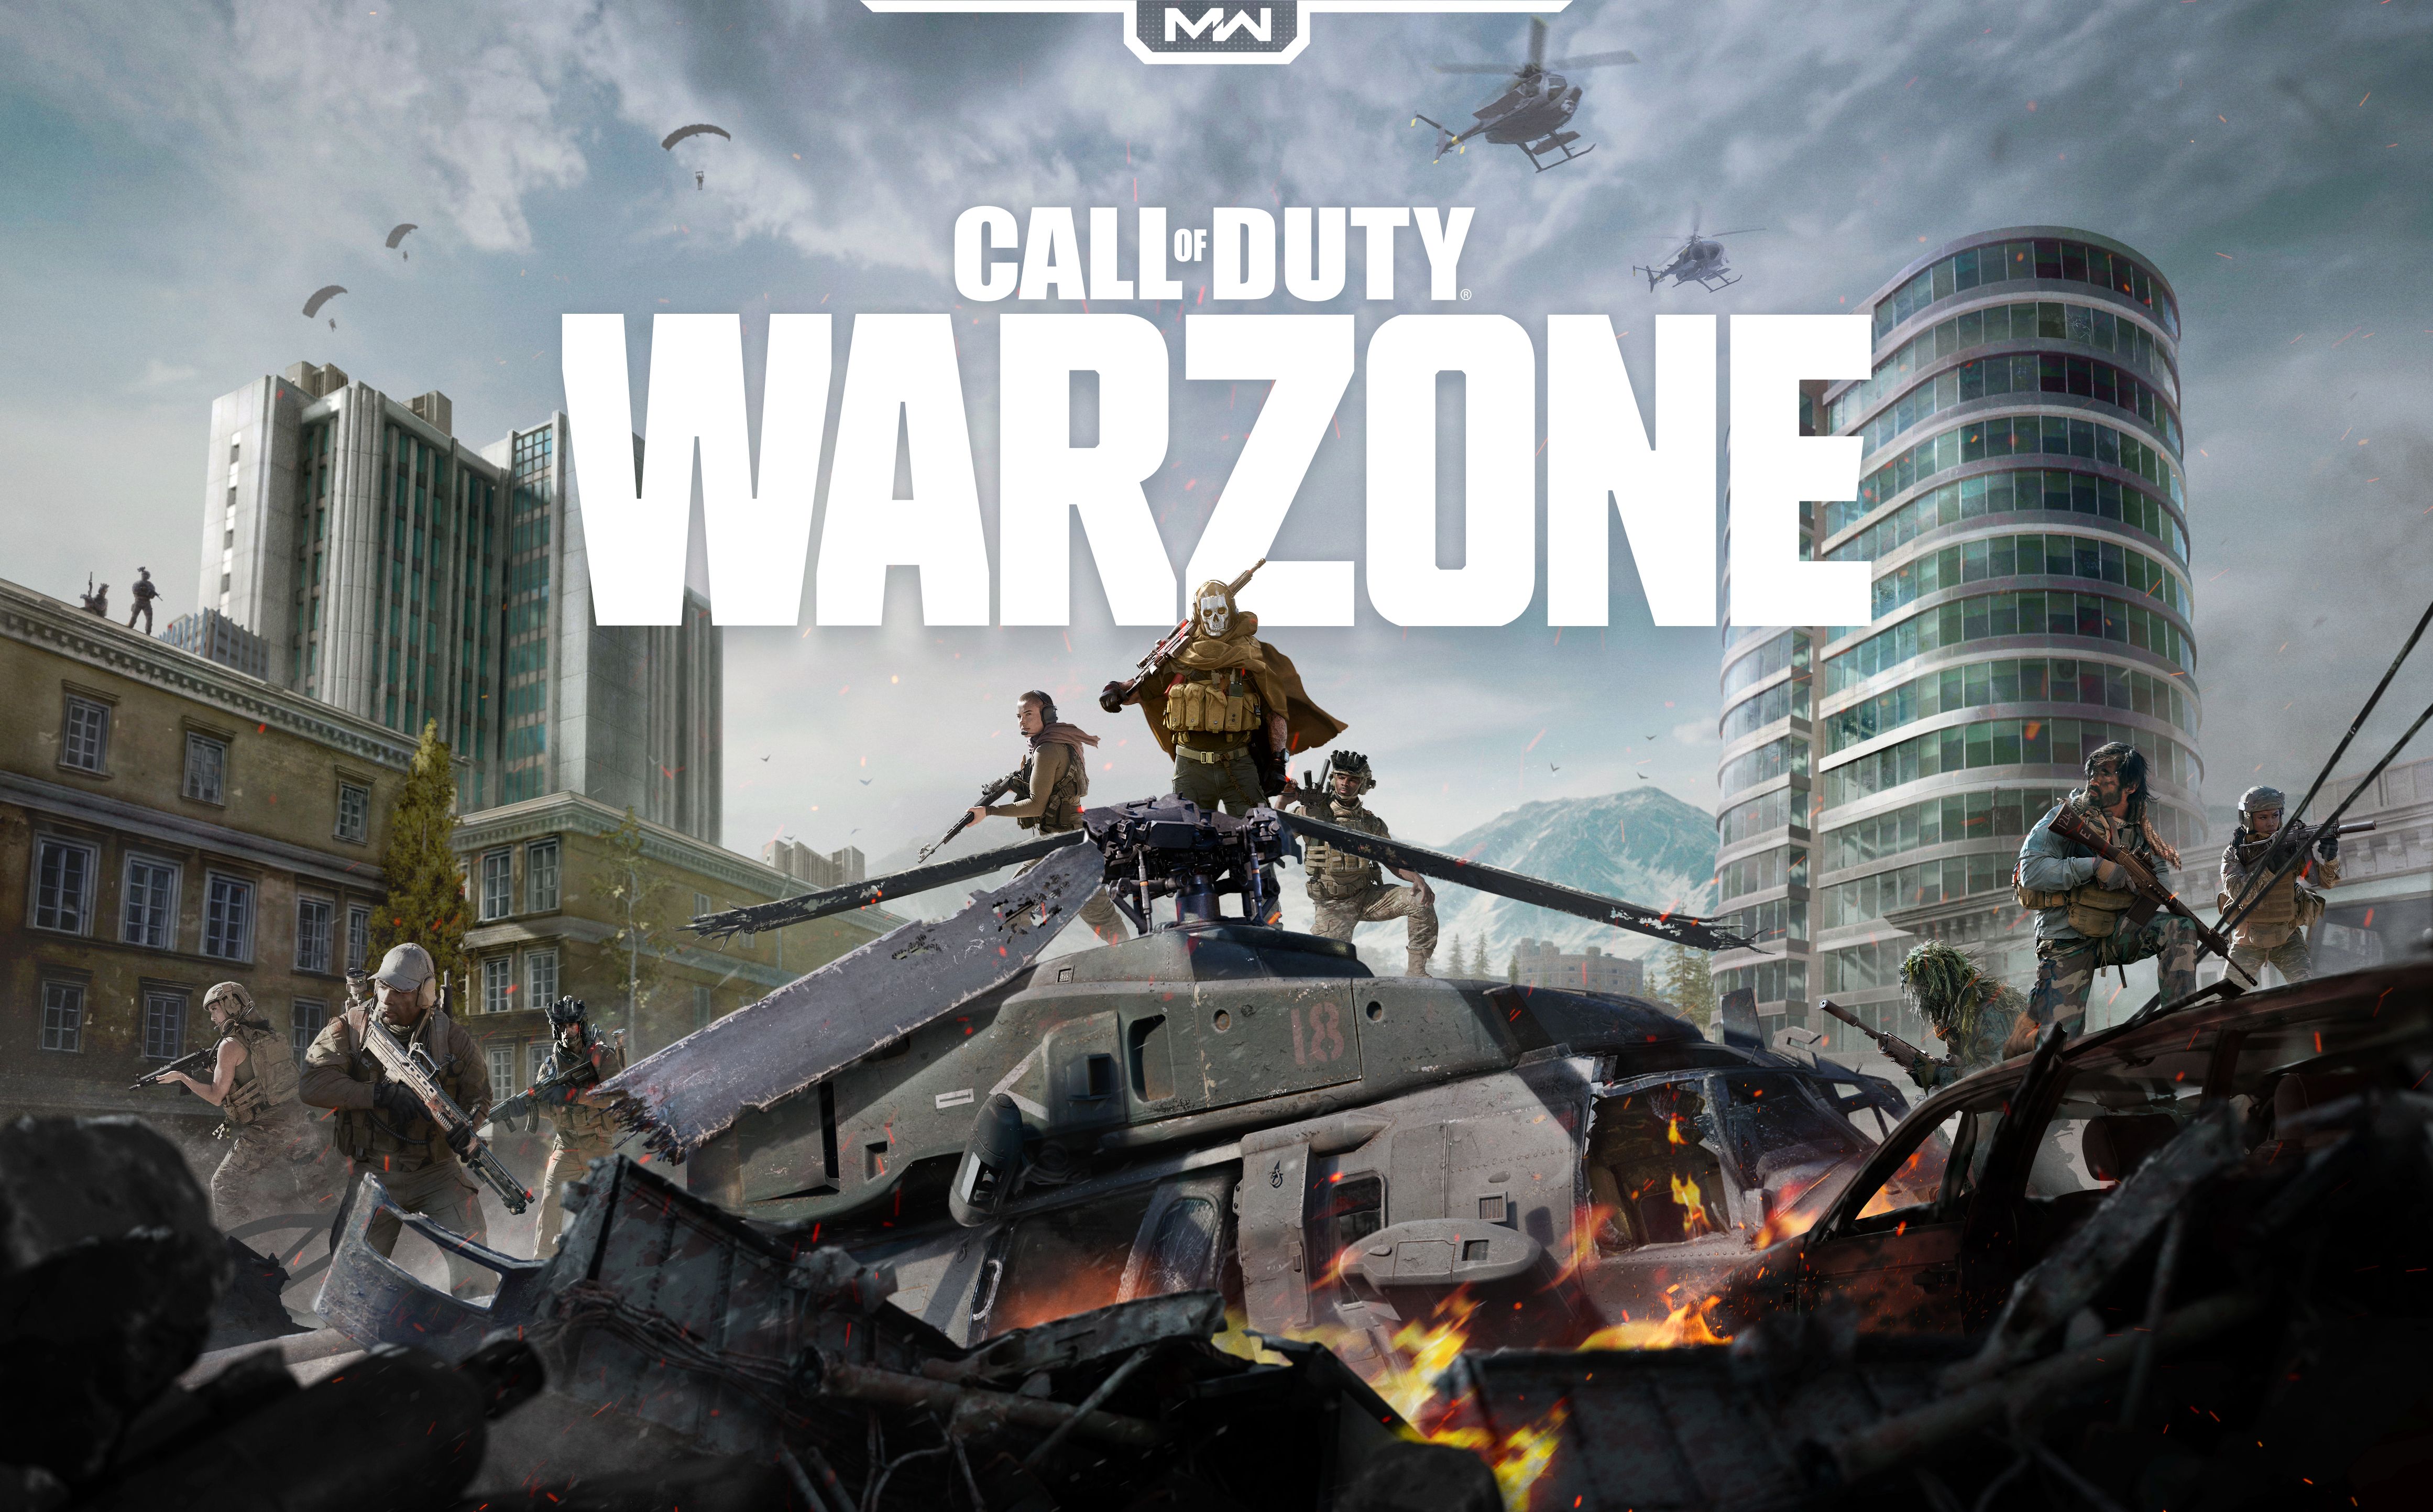 Call of Duty Warzone HD Wallpaper 70850 1920x1080px